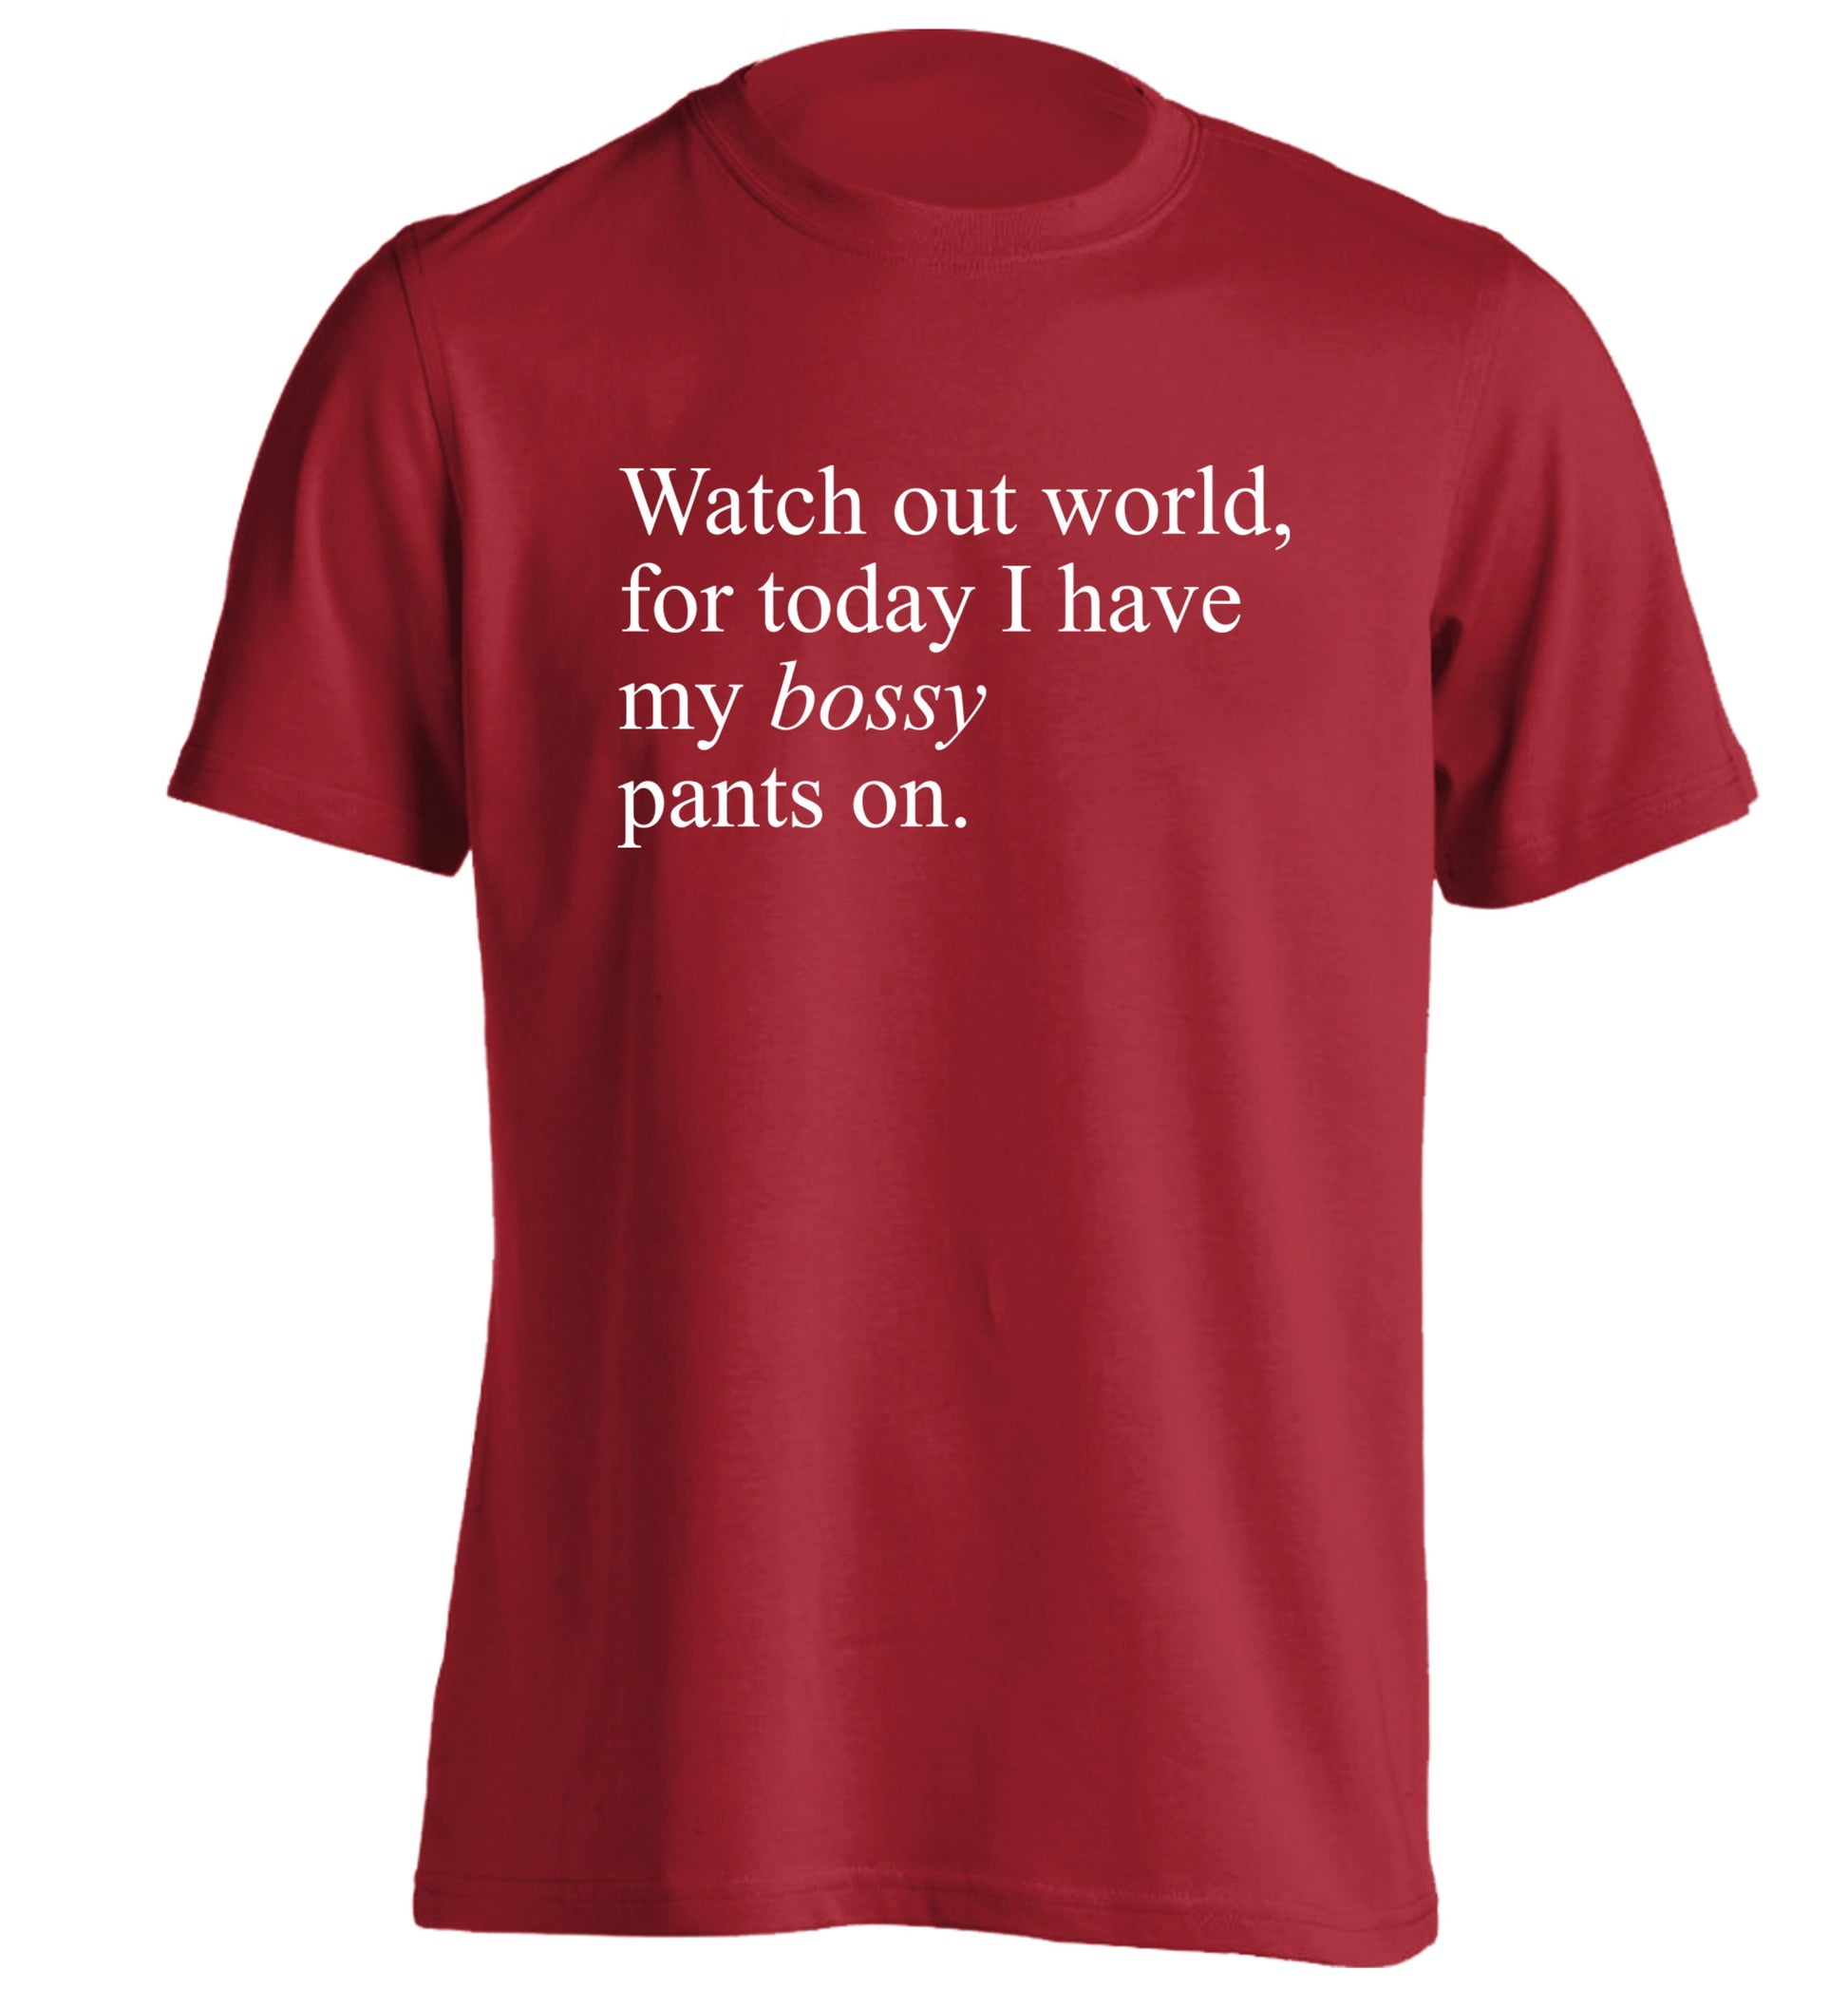 Watch out world, for today I have my bossy pants on adults unisex red Tshirt 2XL